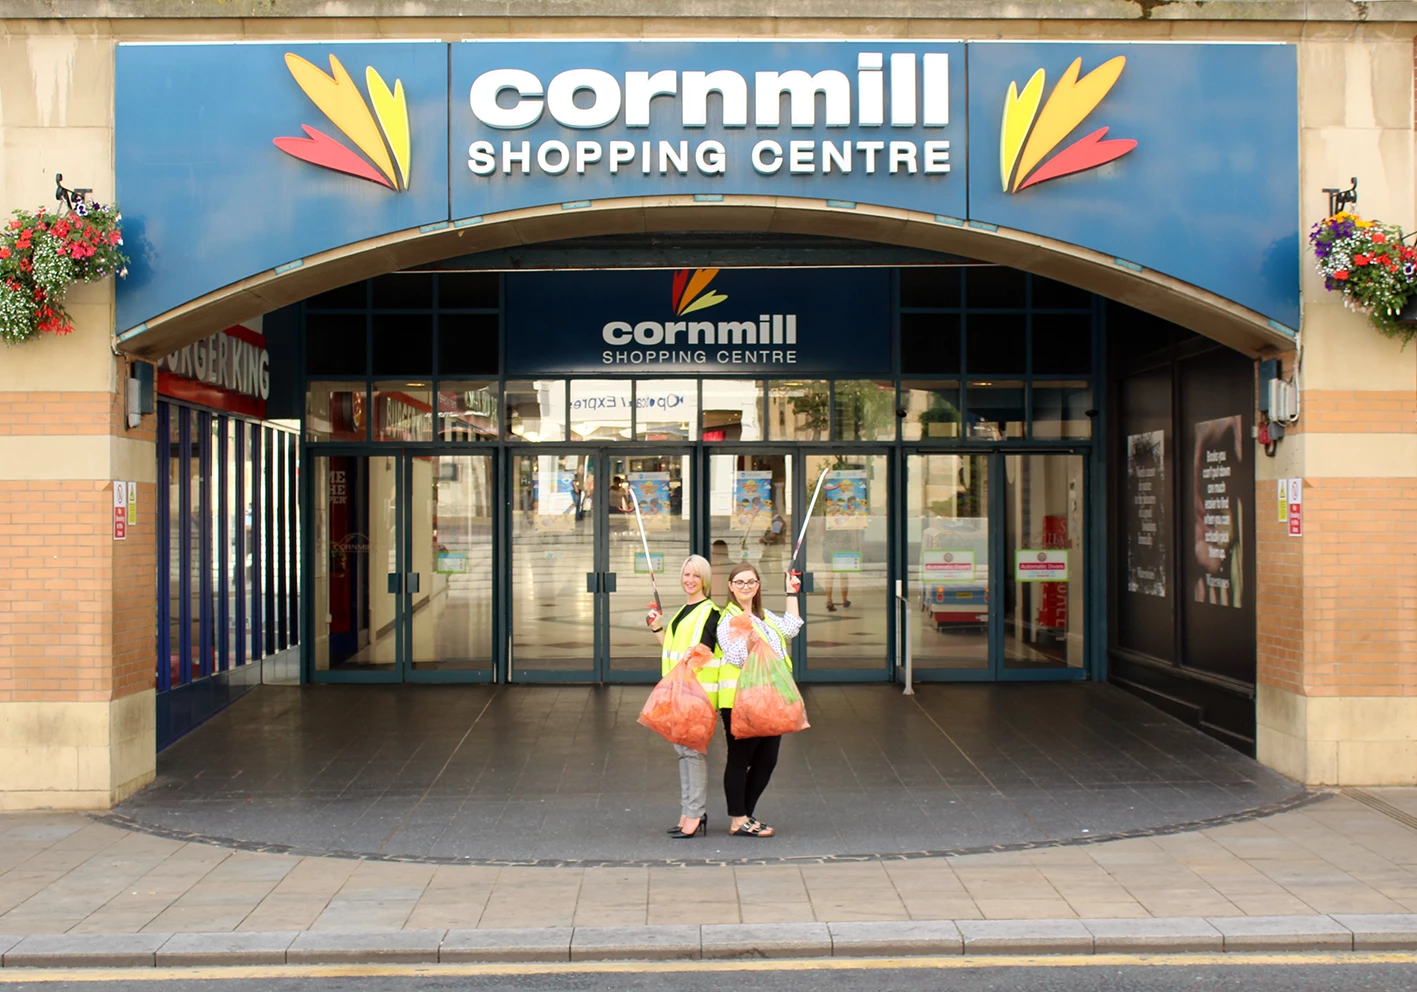 Marketing manager of the Cornmill Shopping Centre Kelly Hutchinson and Darlington Cares Programme Officer Chelsea Johnson